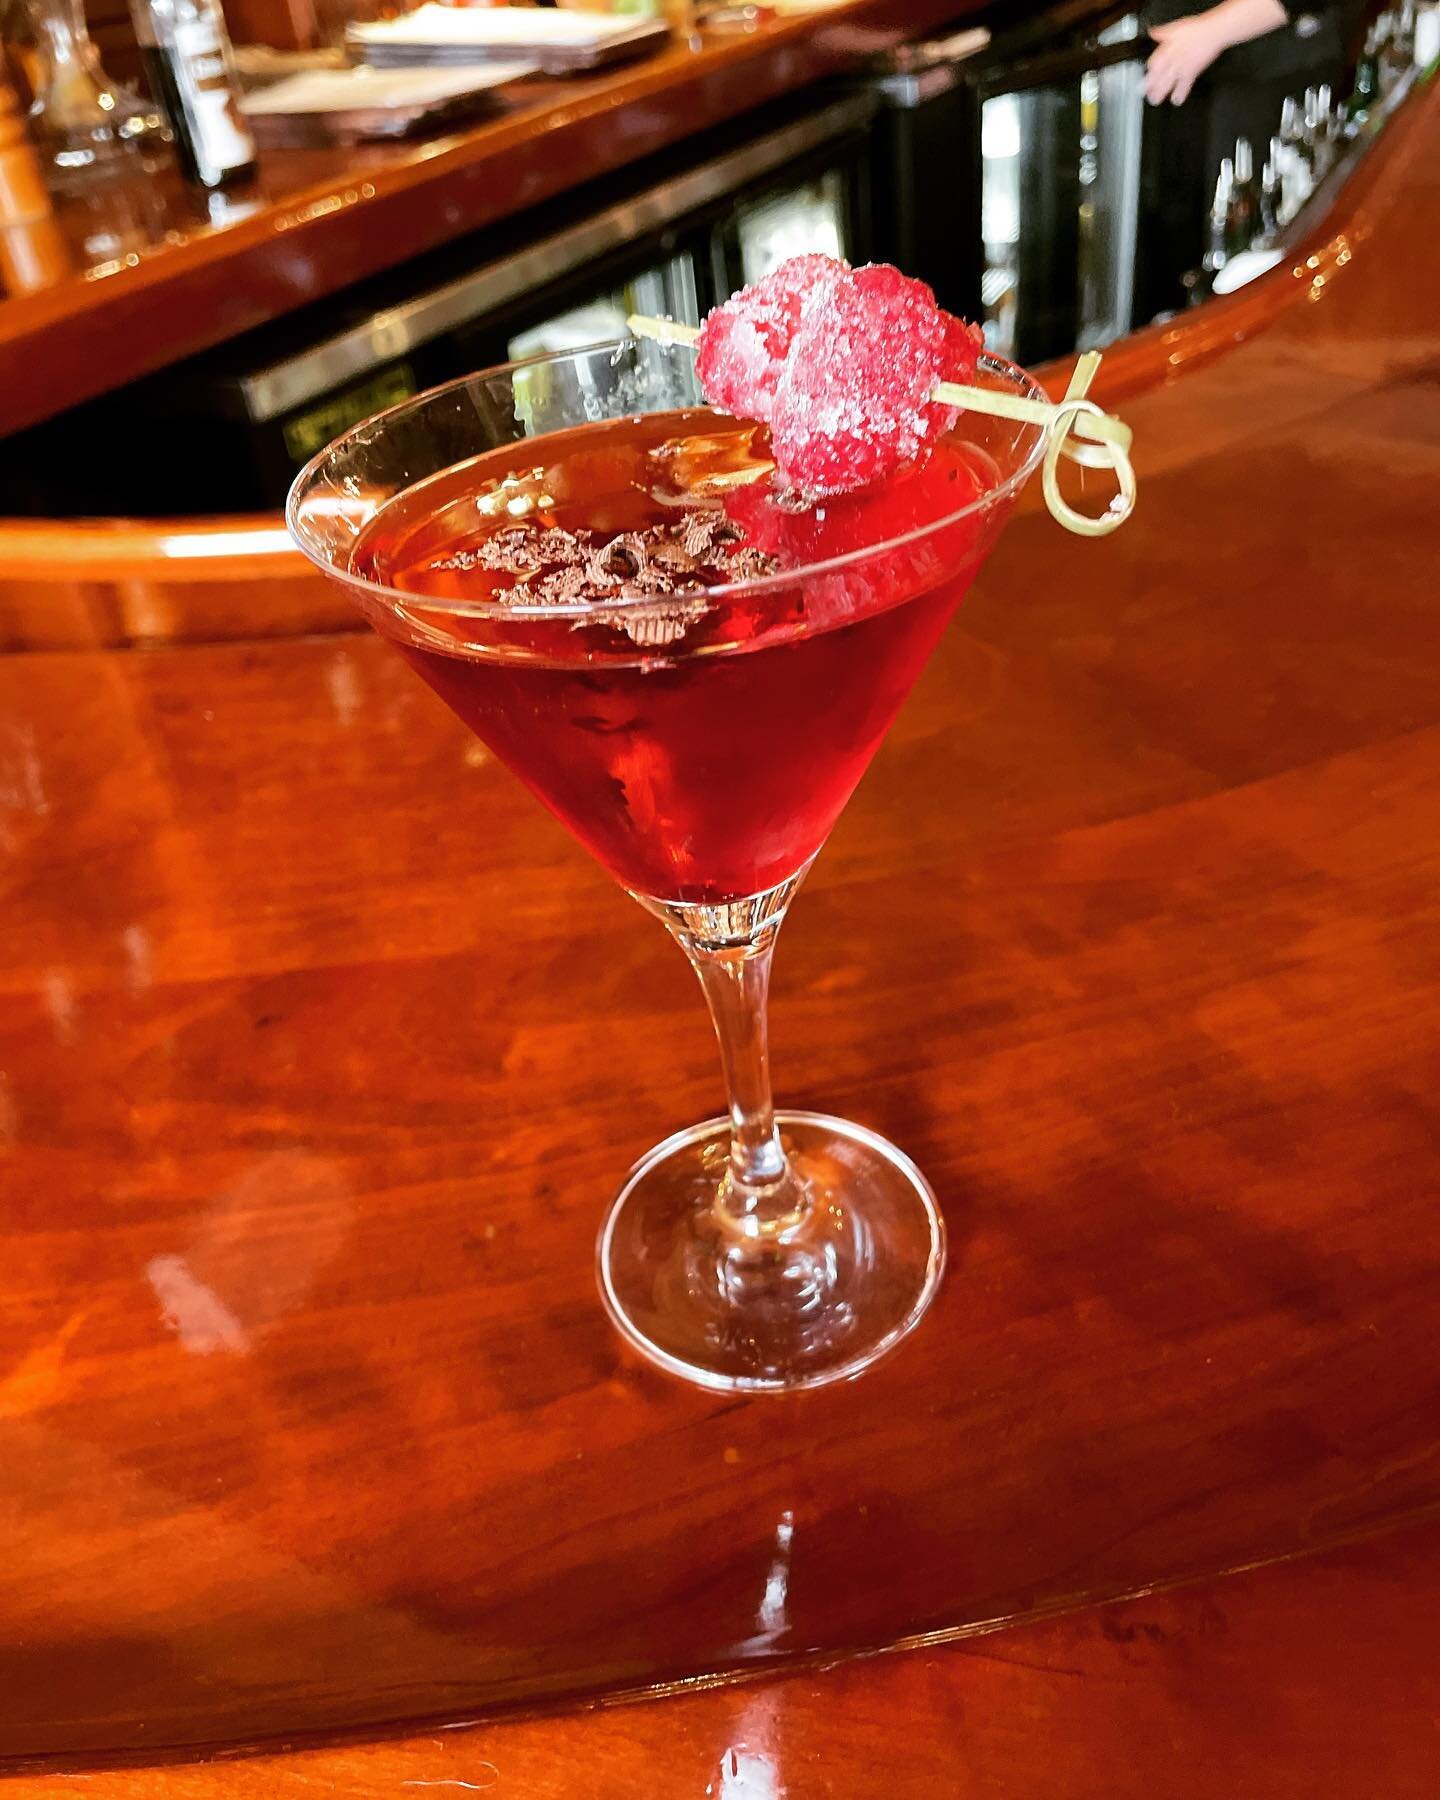 Valentine cocktails- The Raspberry Chocolatini or The Love Potion #SouthernInn#ValentineCocktails #ValentineWeekend